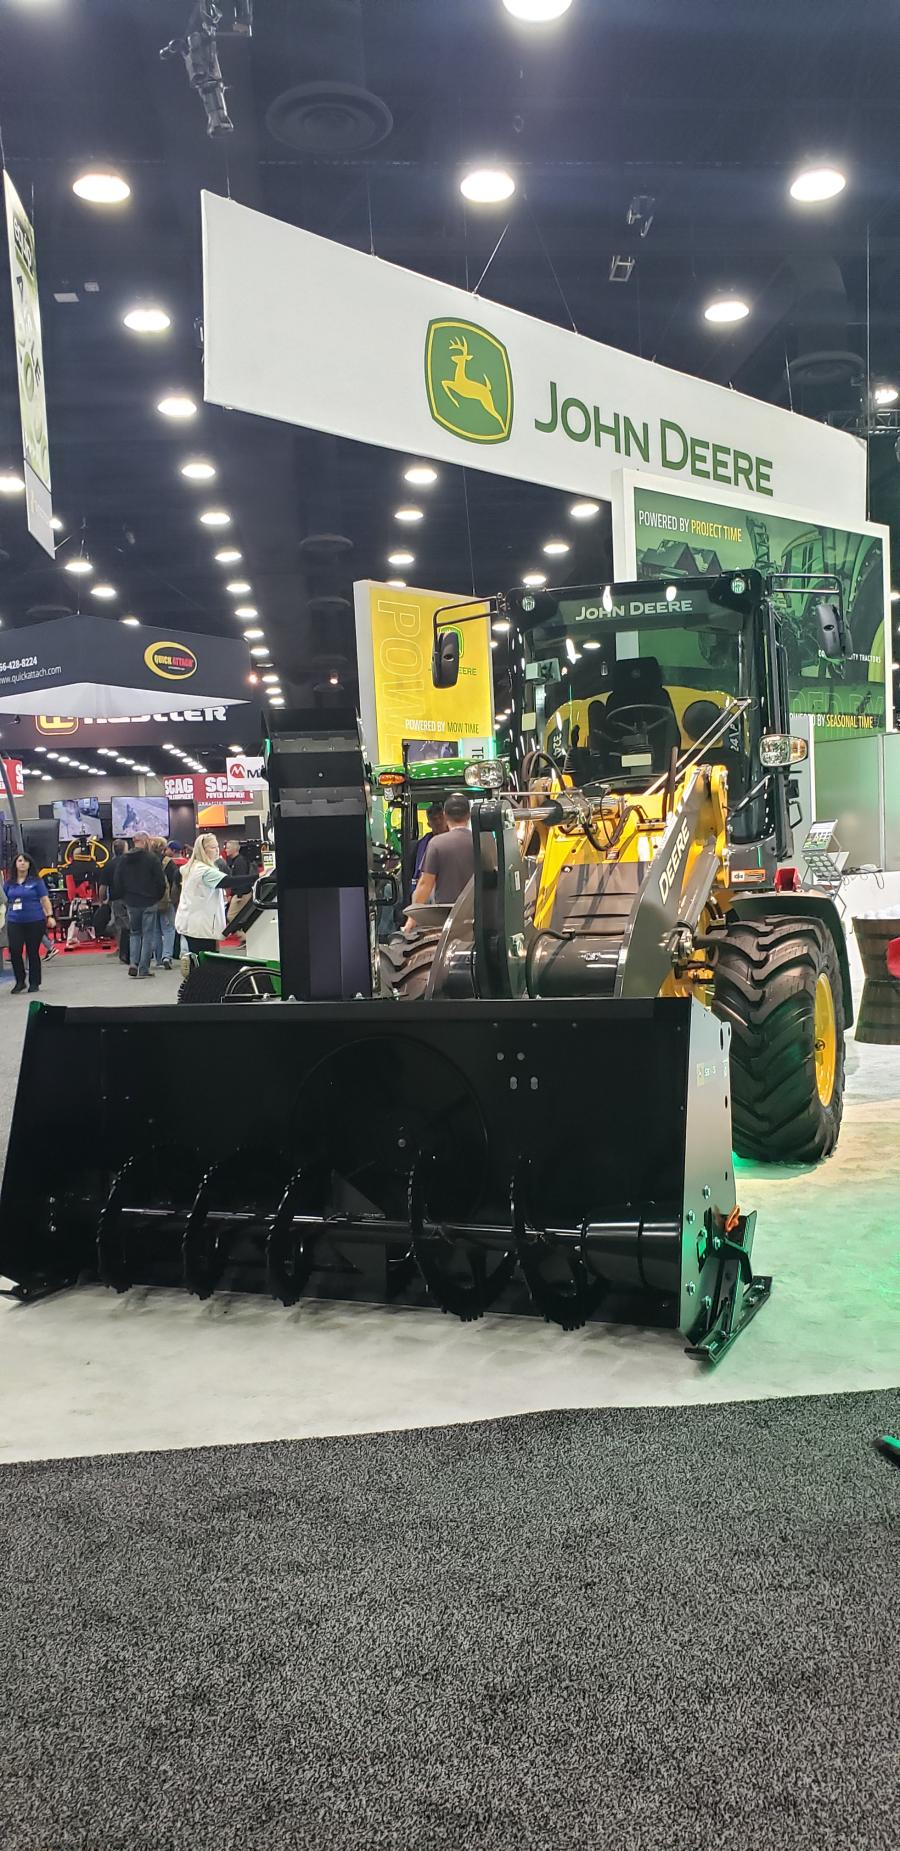 John Deere shows off its snow blower attachment for its wheel loader. 
(CEG photo)